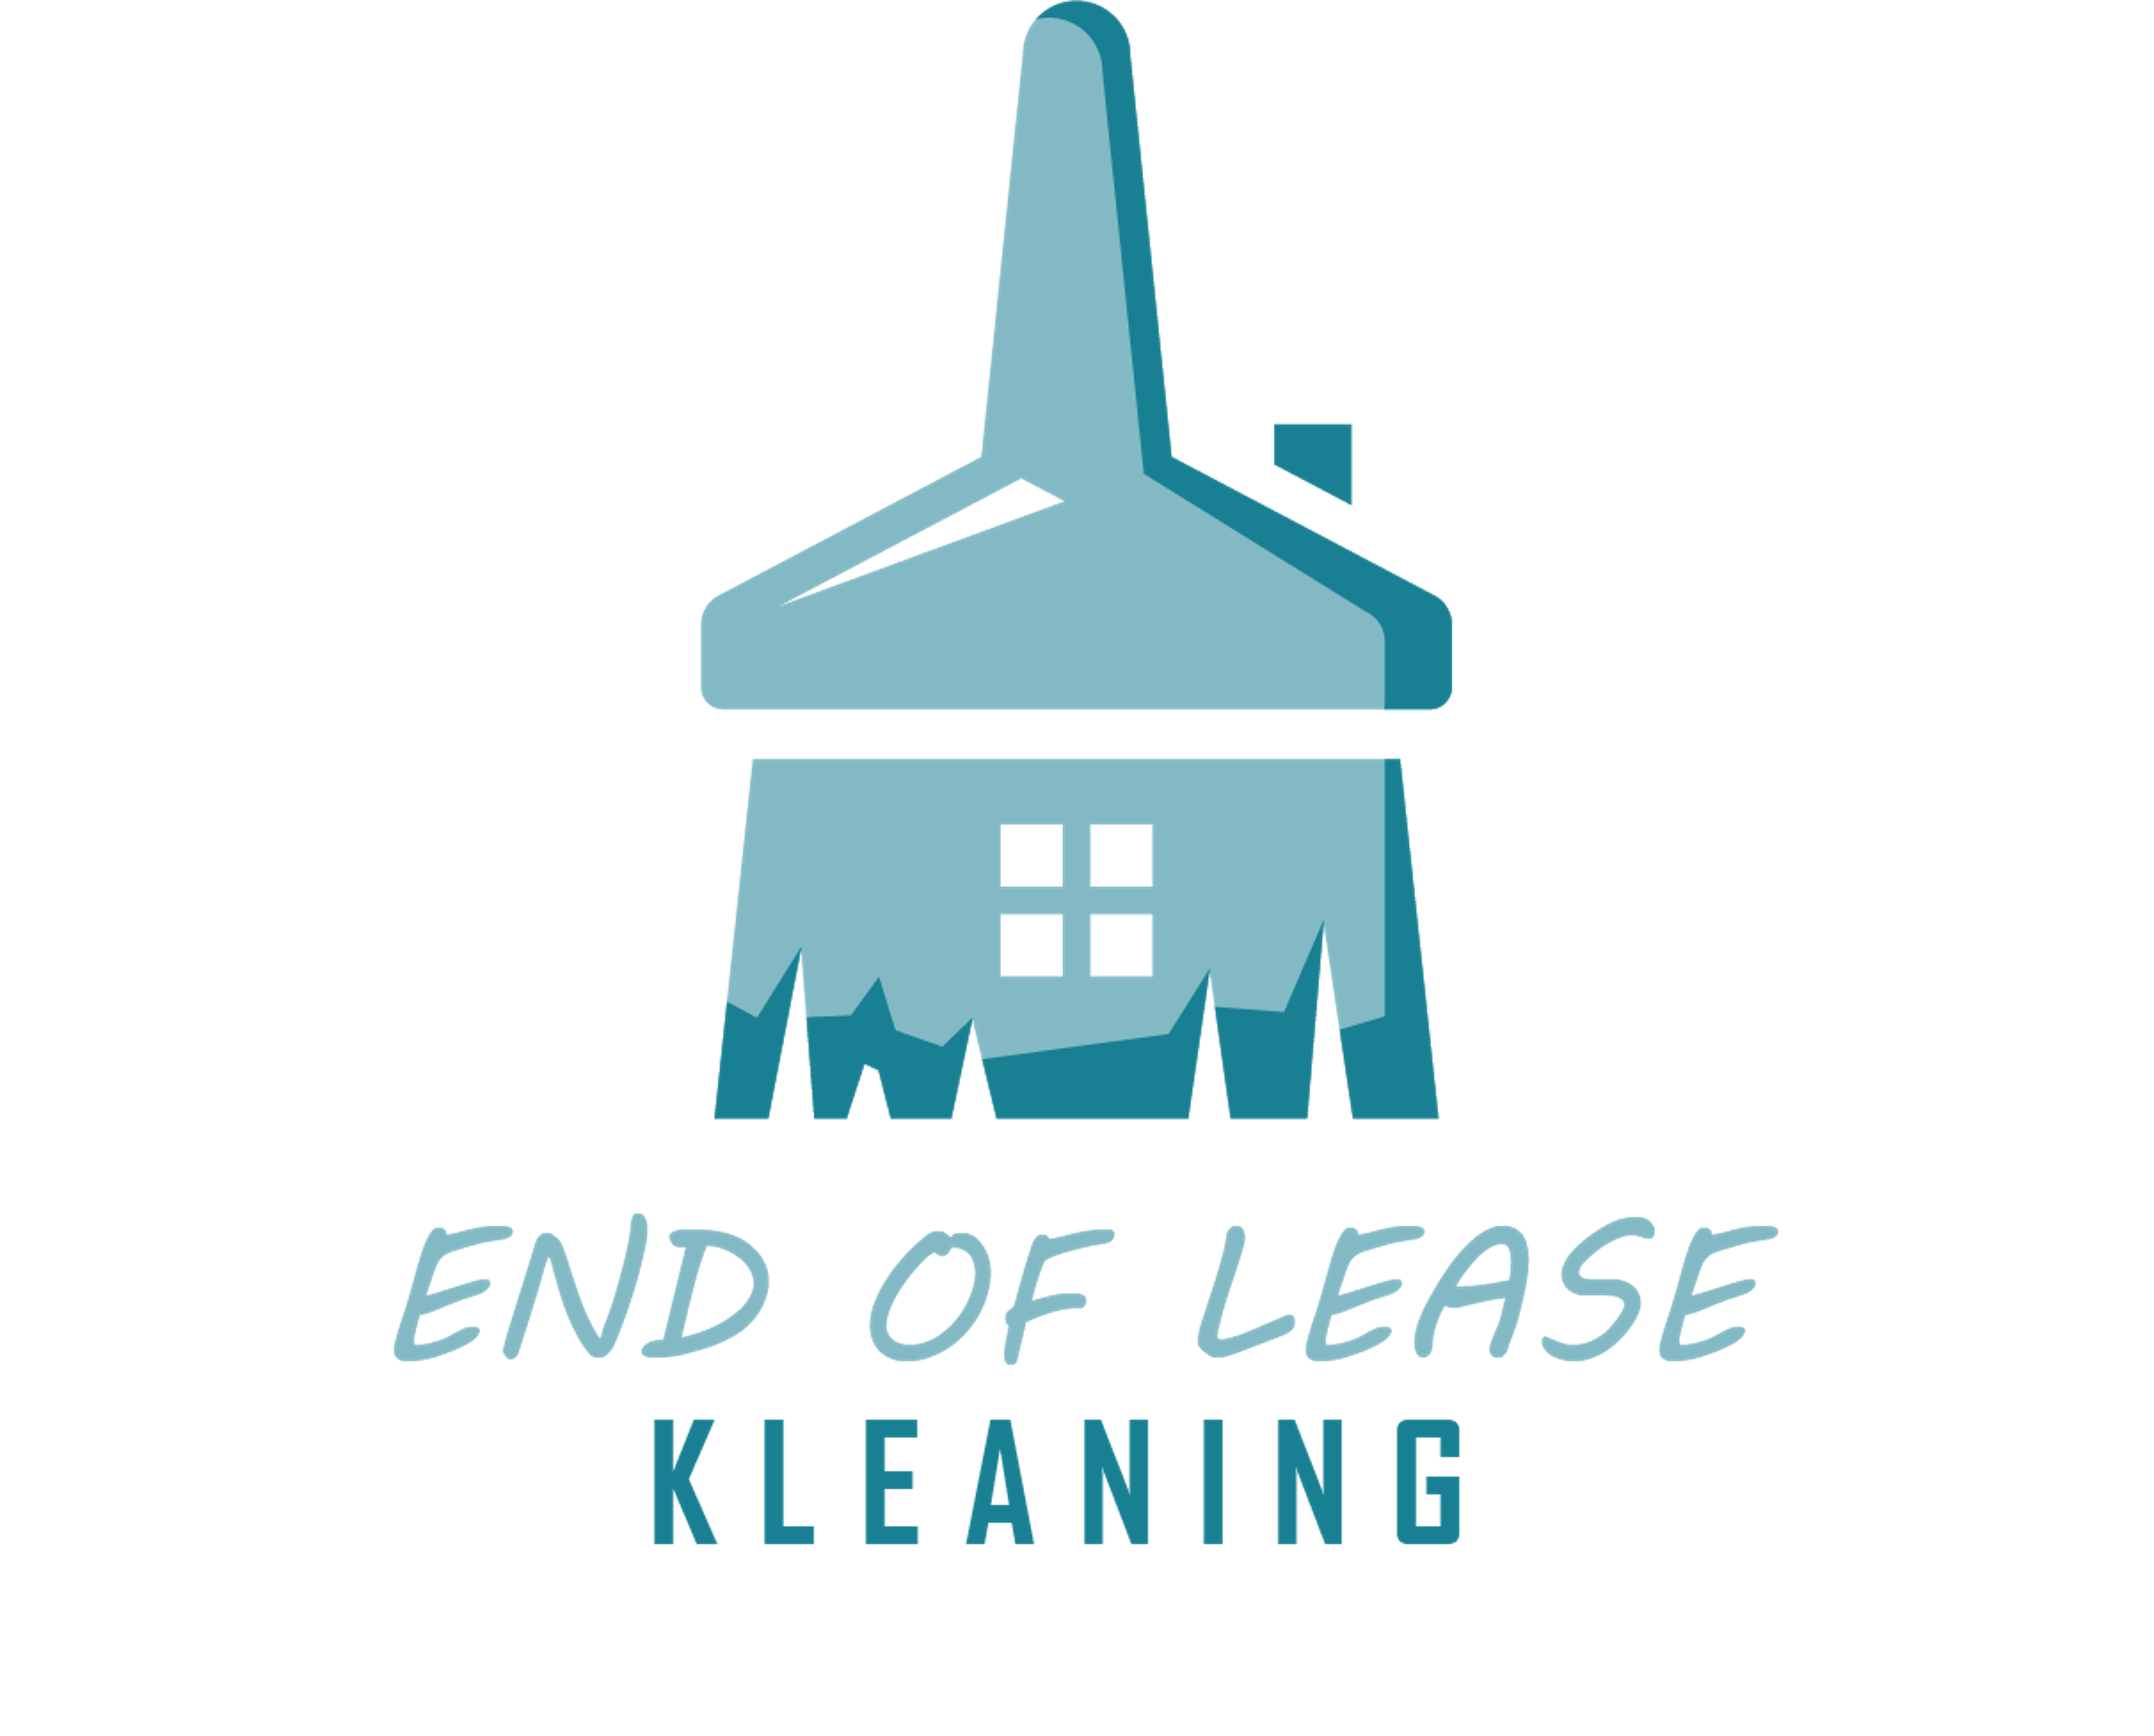 End Of Lease Kleaning